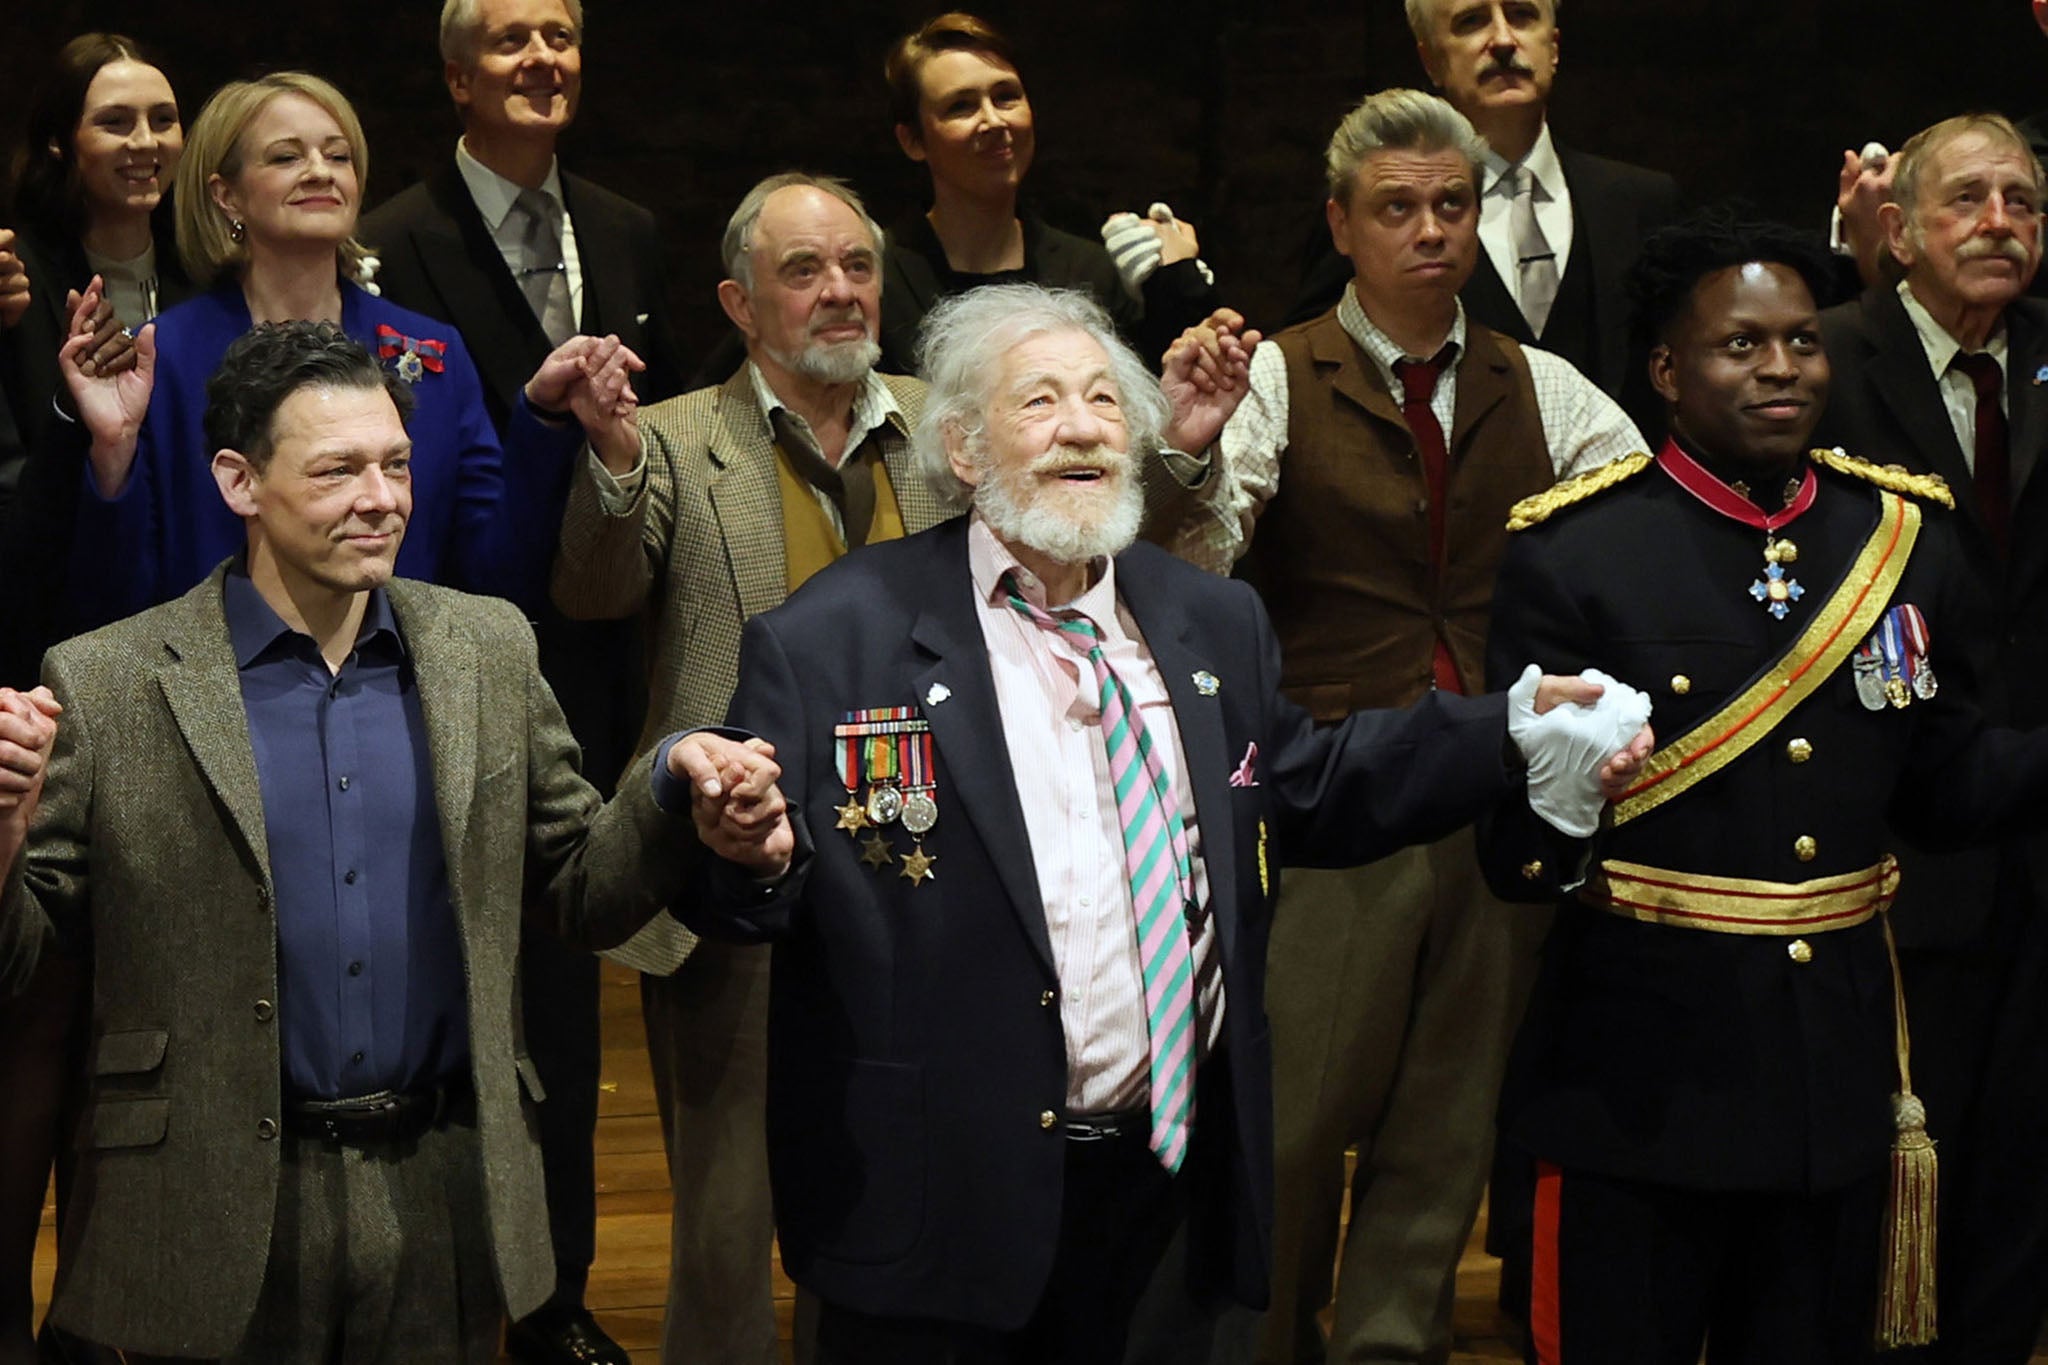 Sir Ian and castmates at curtain call for the press night performance of ‘Player Kings’ in April